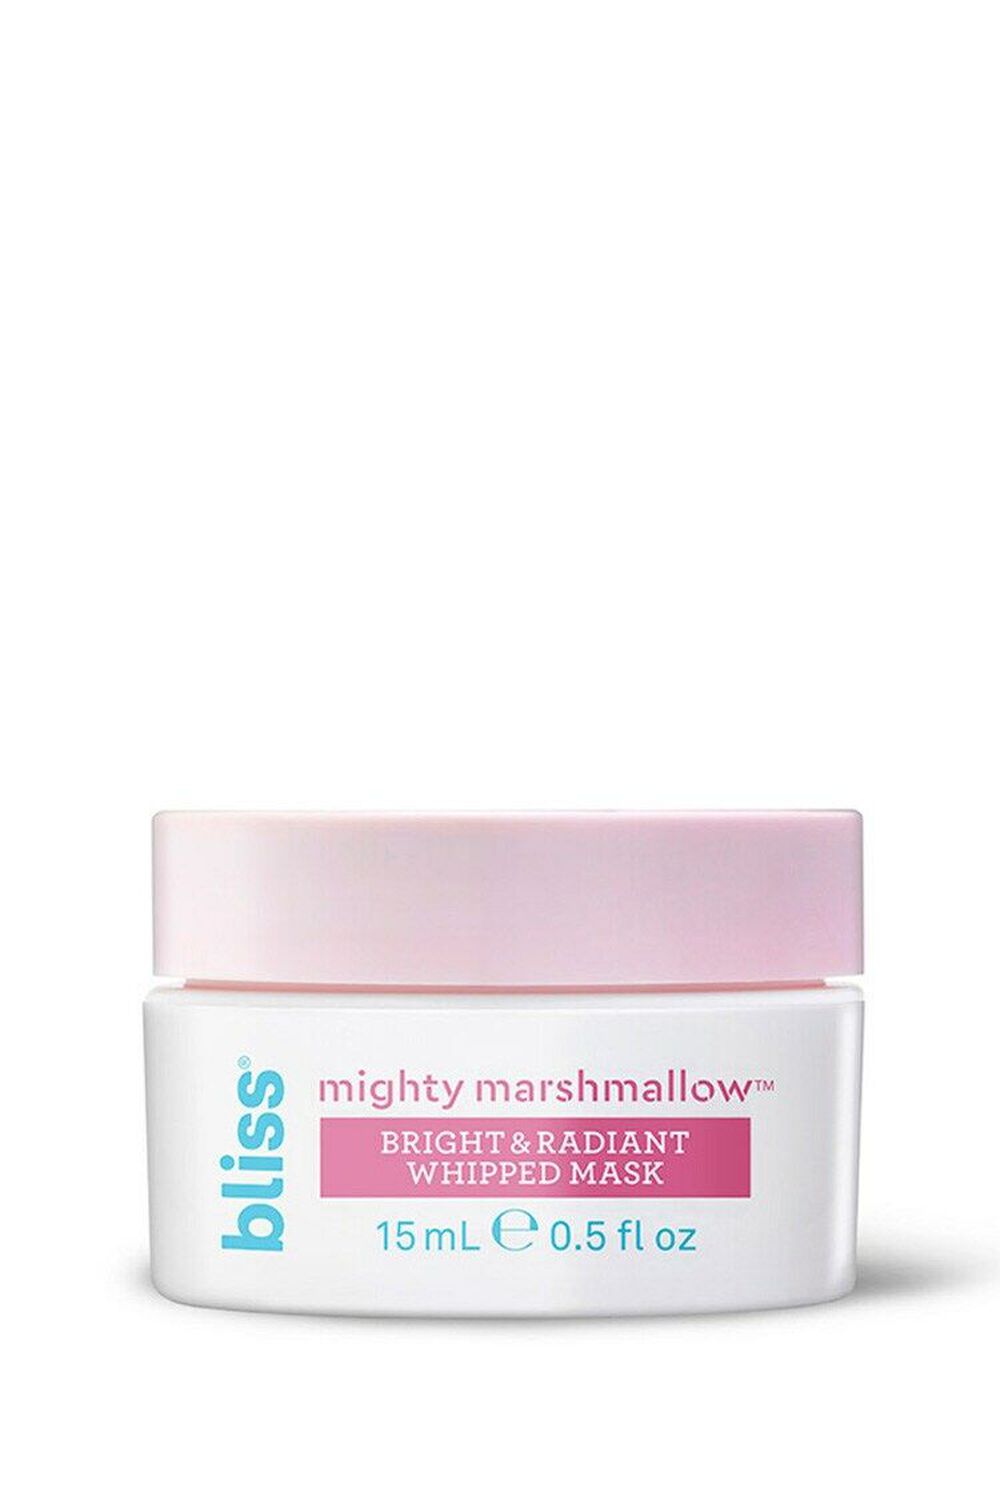 Mighty Marshmallow Bright & Radiant Whipped Mask, image 1